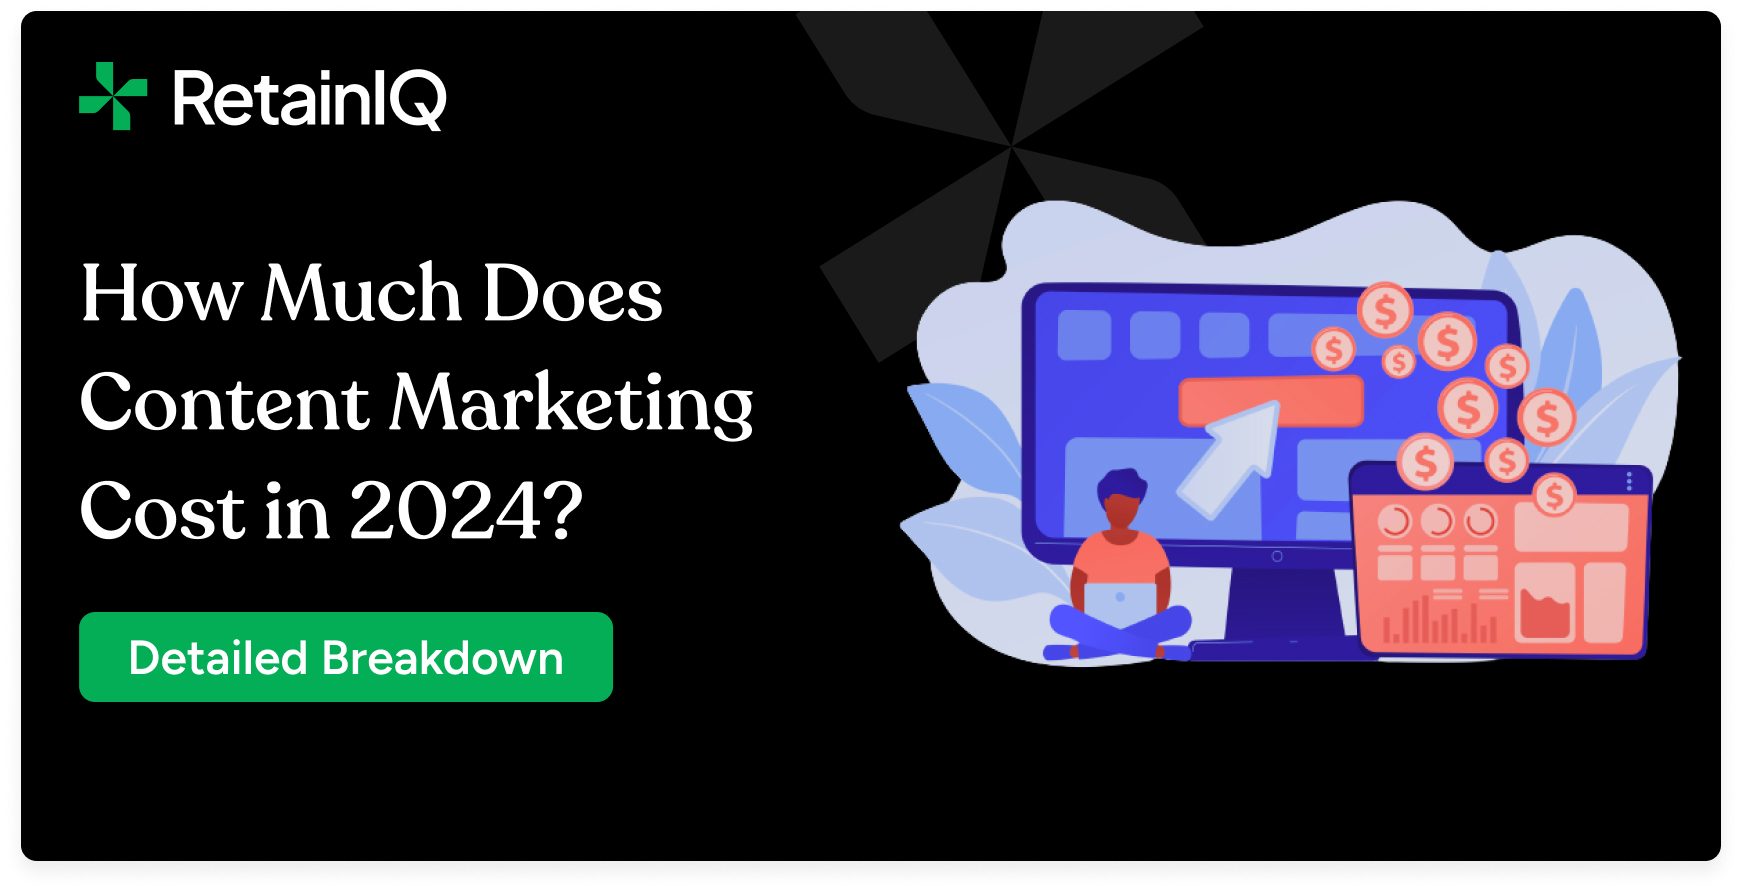 Content Marketing Cost in 2024